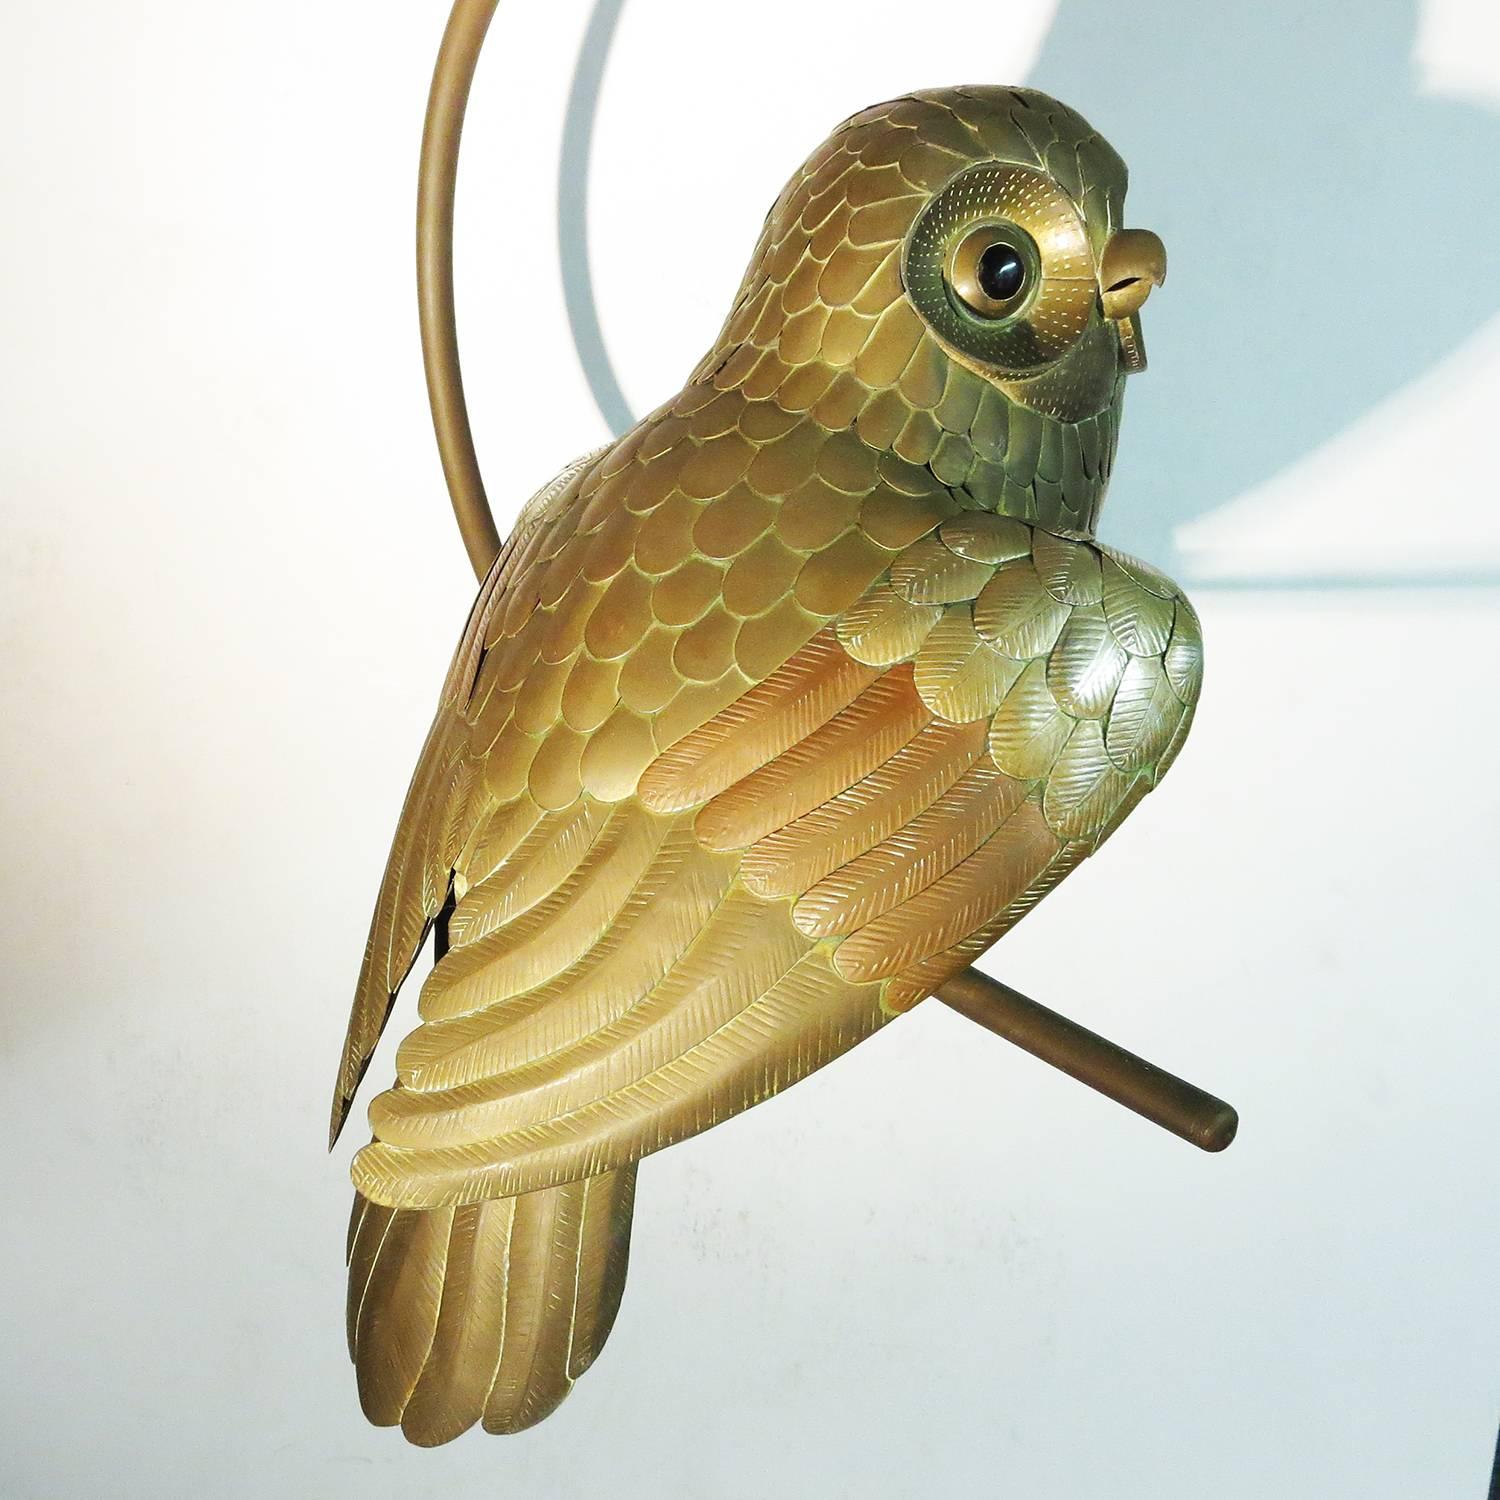 A very fine example of the quality metalwork of Mexican artist Sergio Bustamante. His works were sold at Fine galleries in Mexico in the 1960s usually to upscale American tourists. Our owl is an unusual form that doesn't show up very often. The